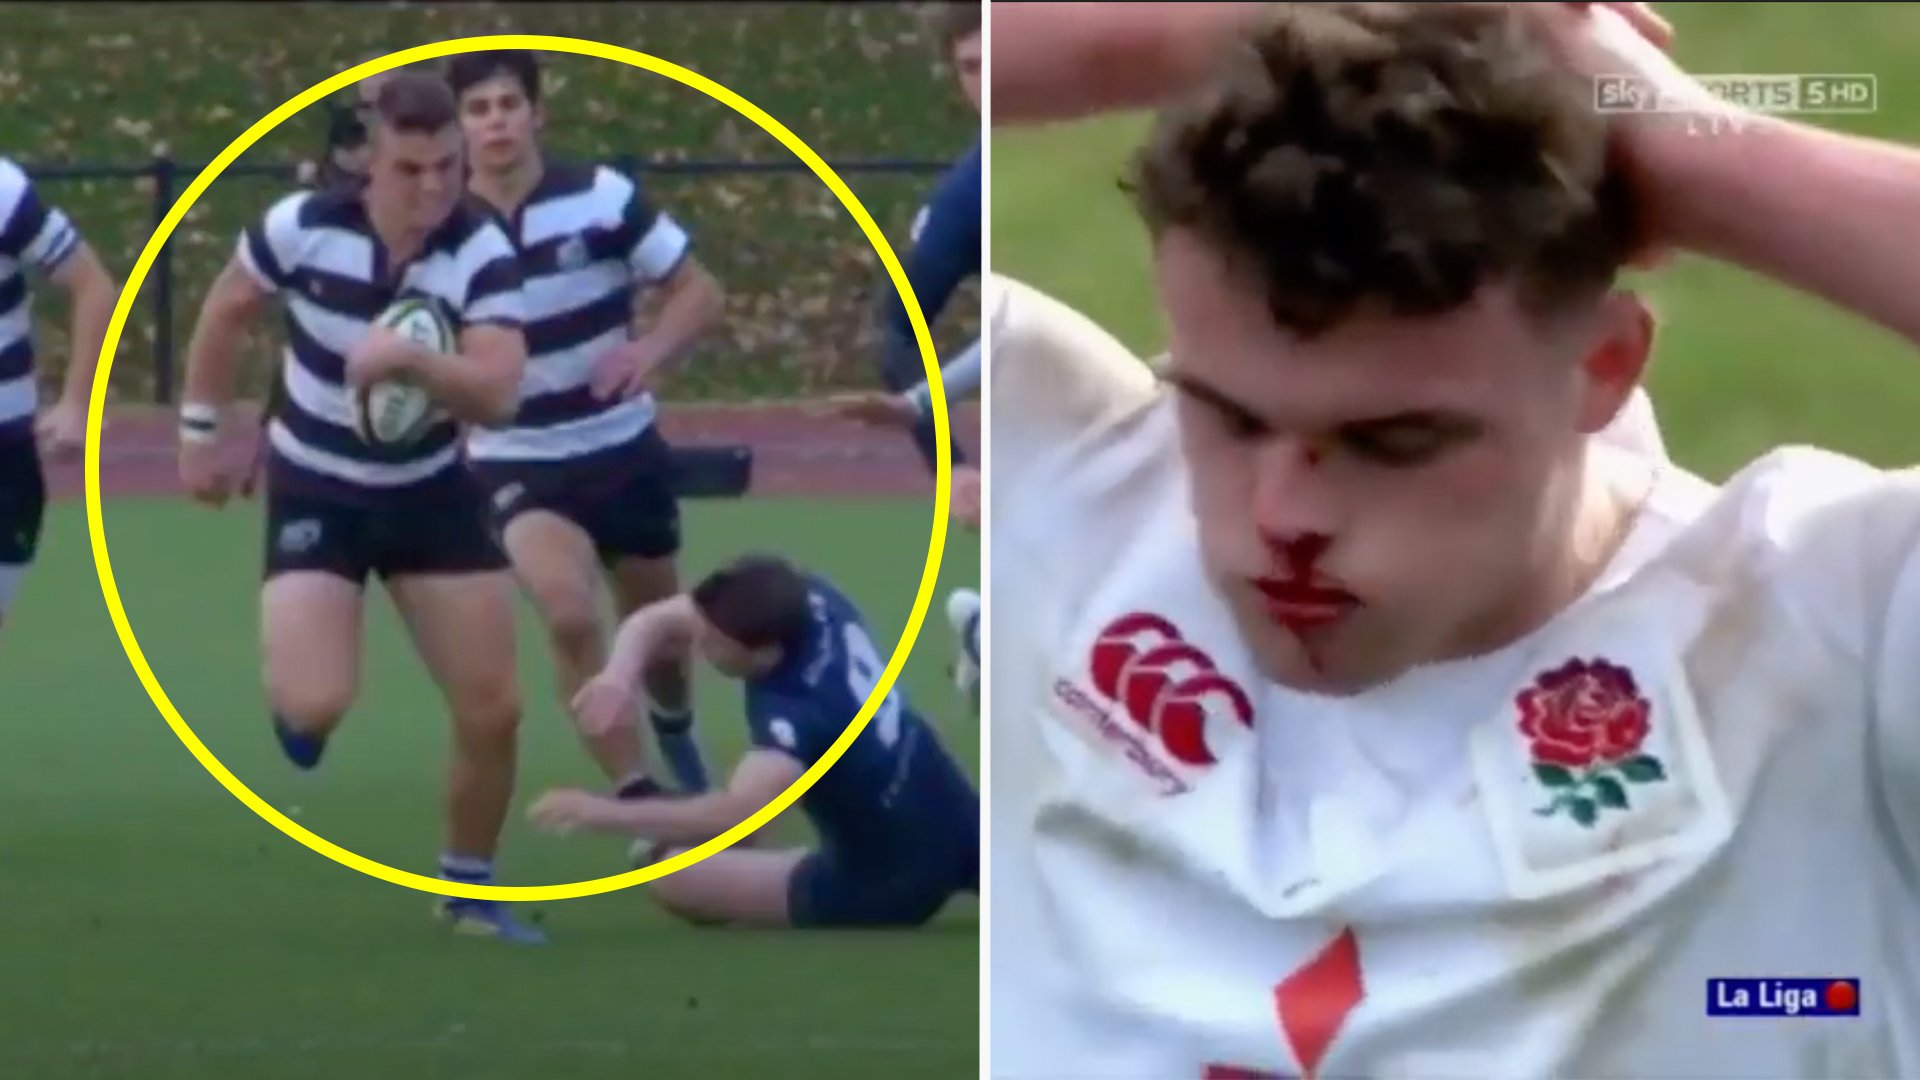 Saracens back row Ben Earl has one of the most destructive schoolboy highlights that we have ever seen